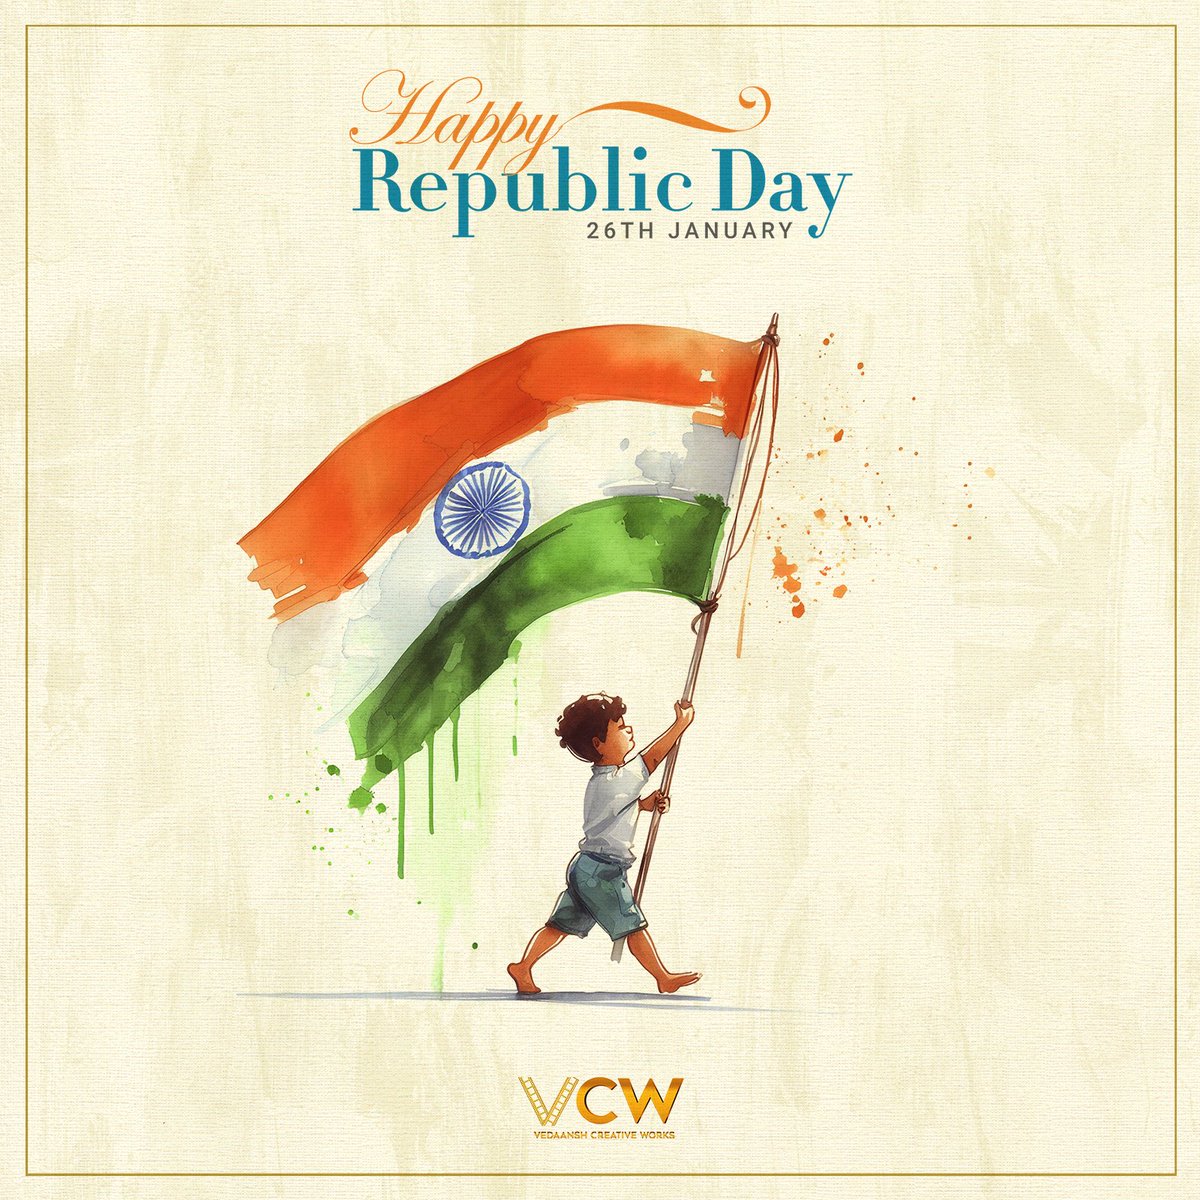 May the flag always wave high, symbolizing the strength, courage, and unity of our great nation. #HappyRepublicDay 🇮🇳